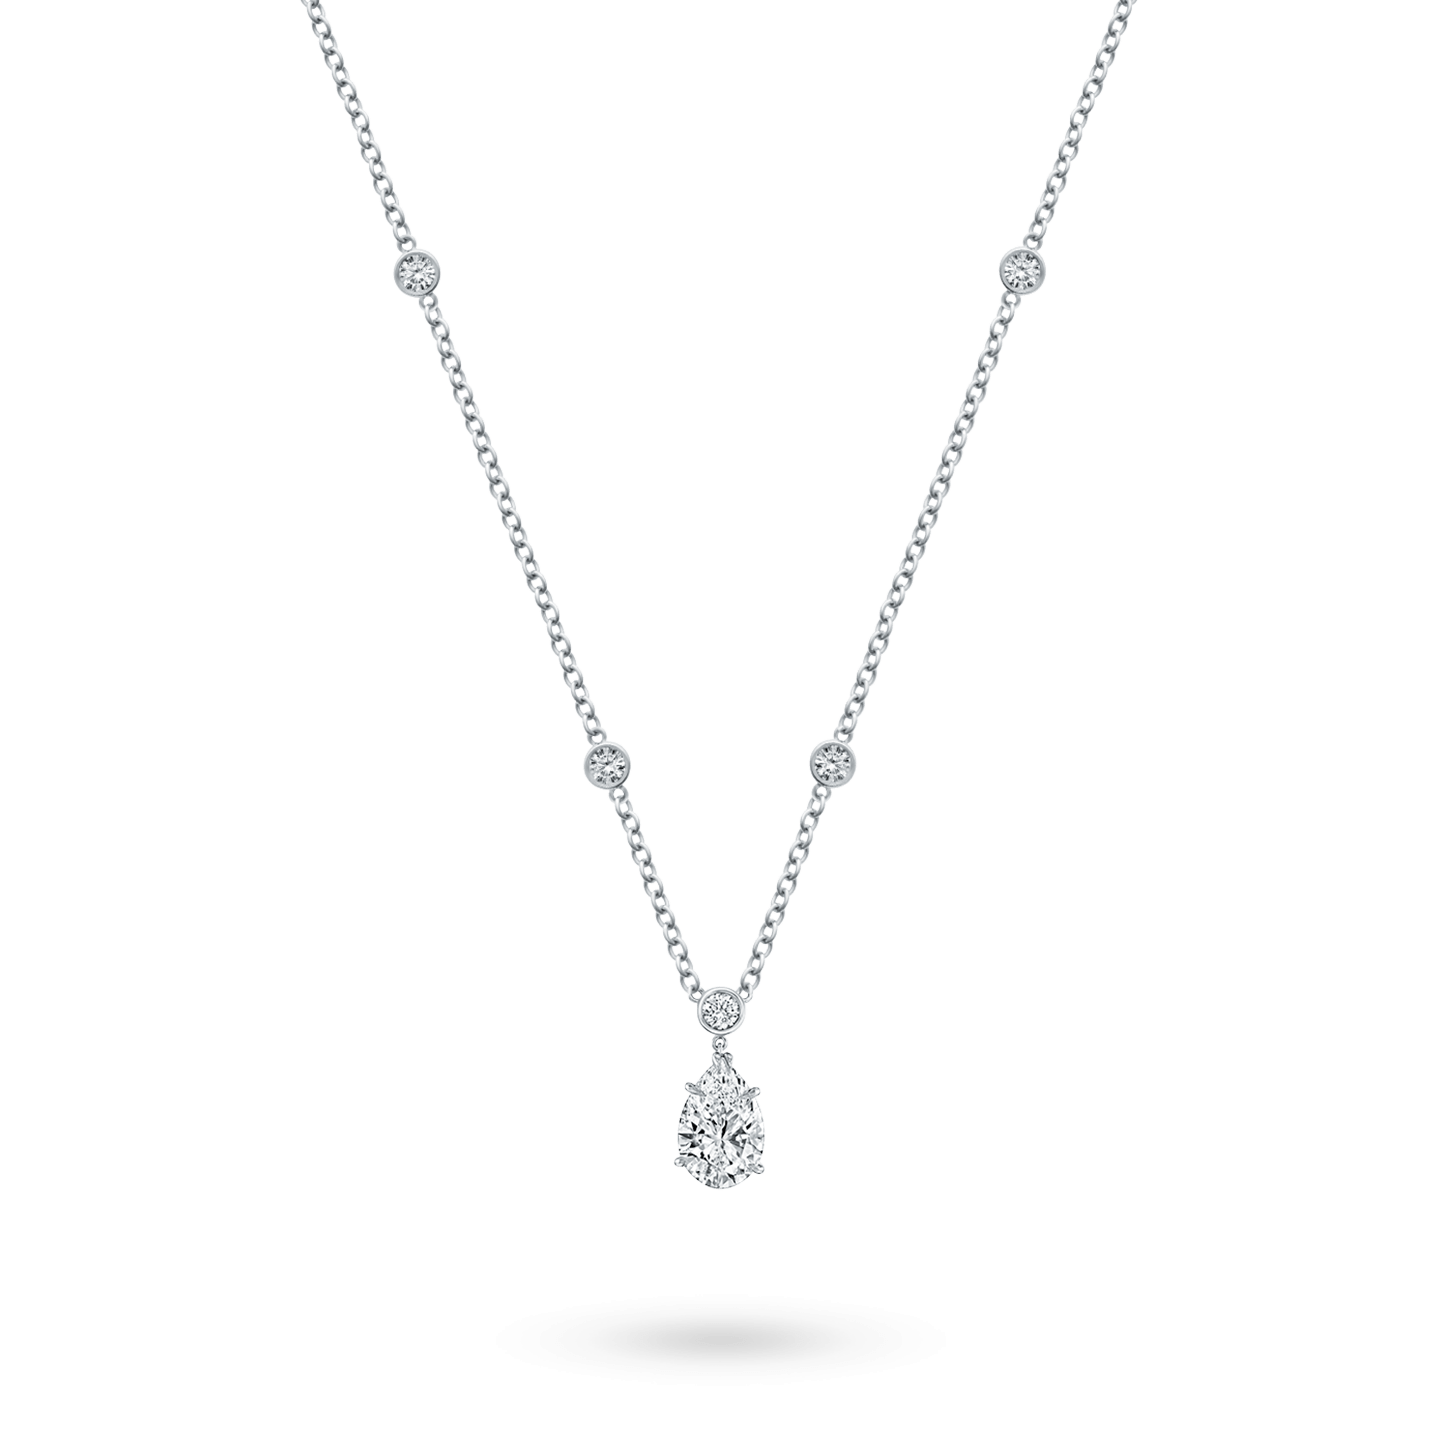 Pear-Shaped Diamond Pendant on a Rondelle Chain, Product Image 2